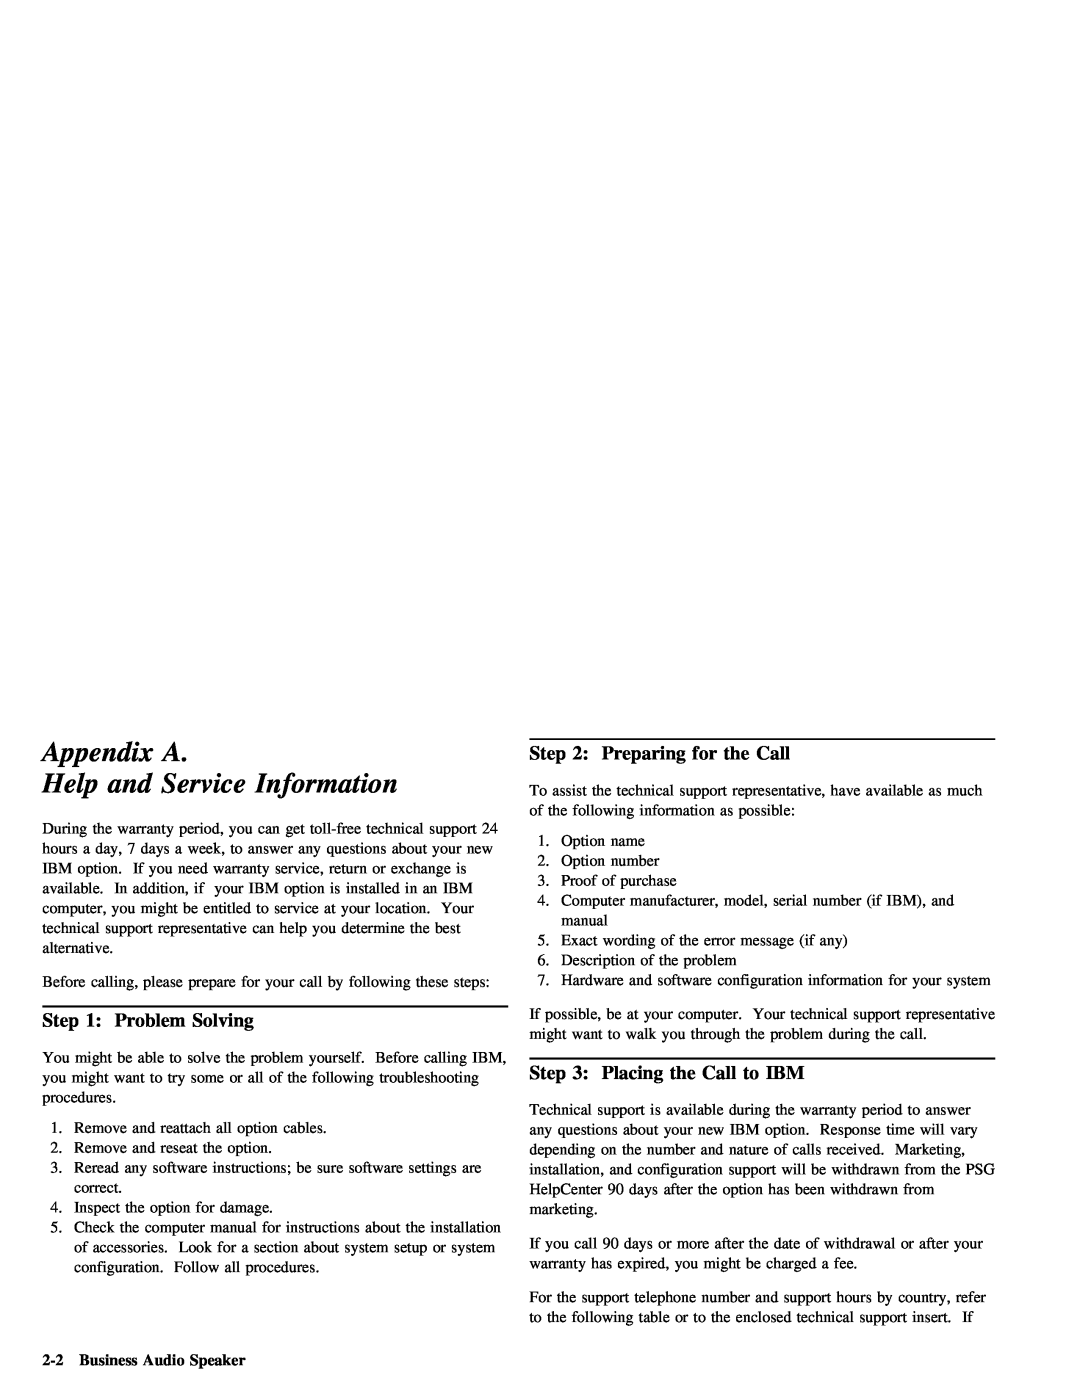 IBM 05L1596 manual Appendix A Help and Service Information, Step, Call, Problem Solving, 2-2Business Audio Speaker 